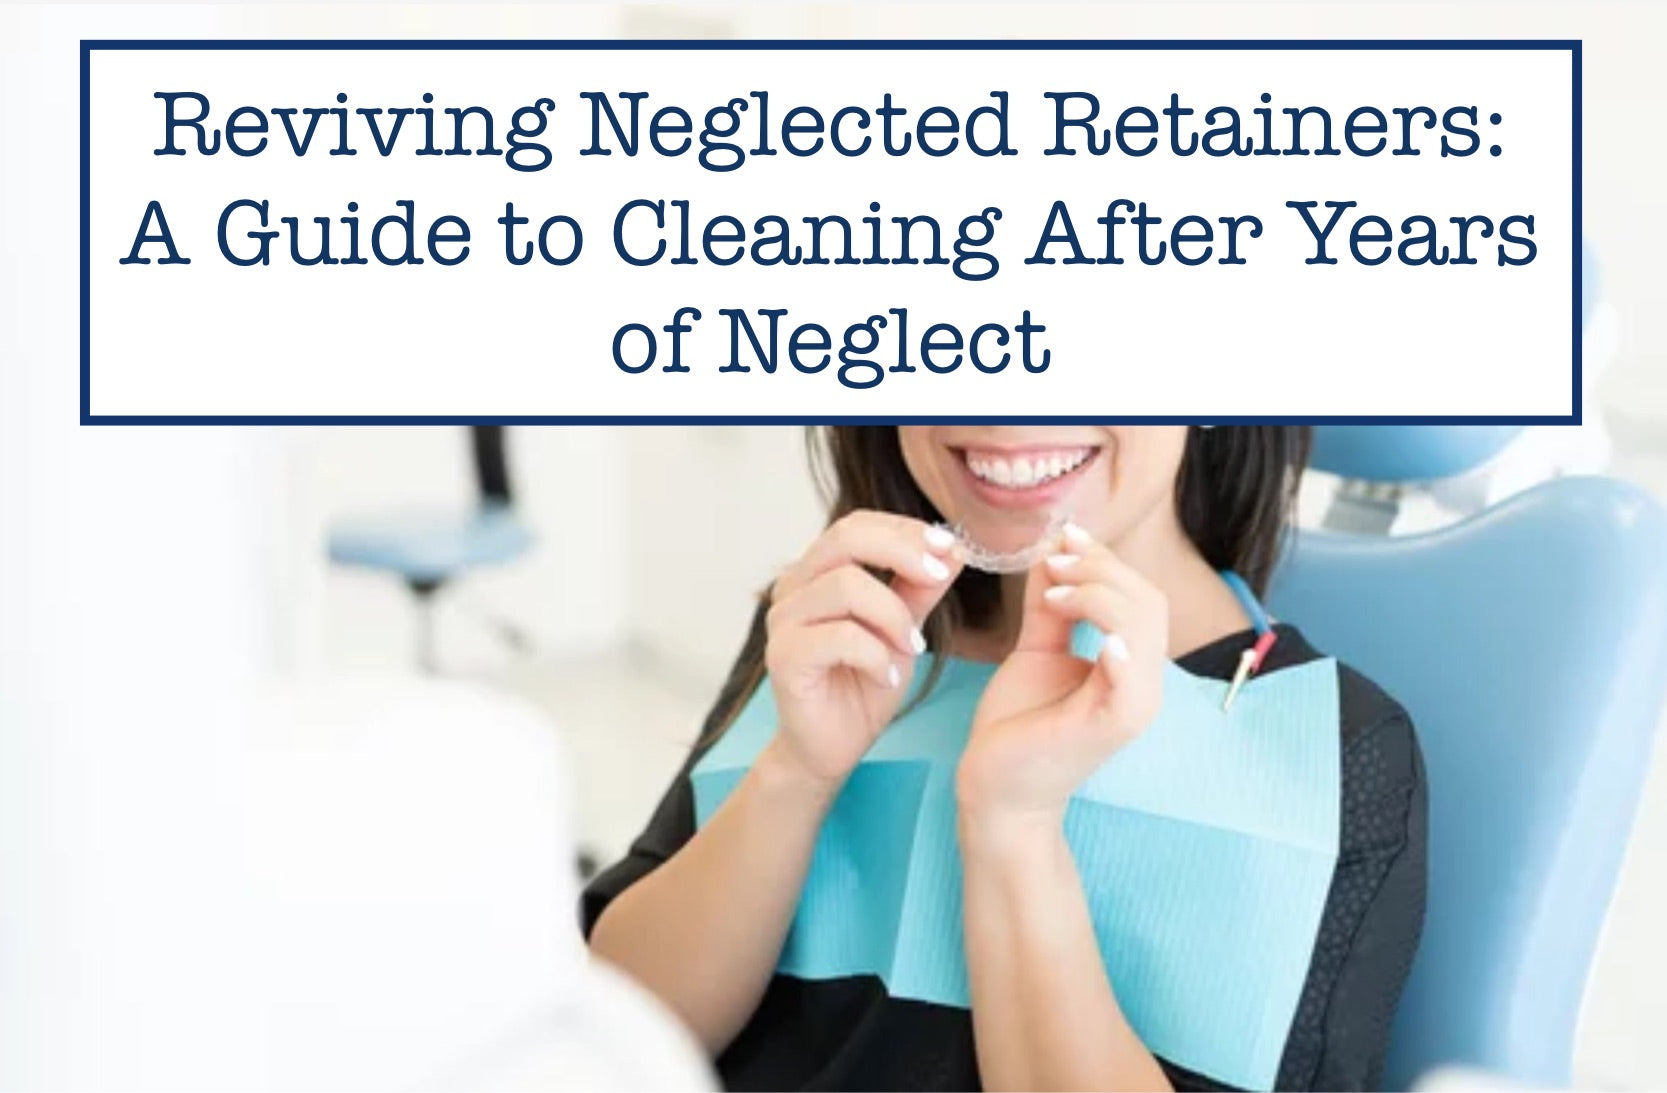 Reviving Neglected Retainers: A Guide to Cleaning After Years of Neglect